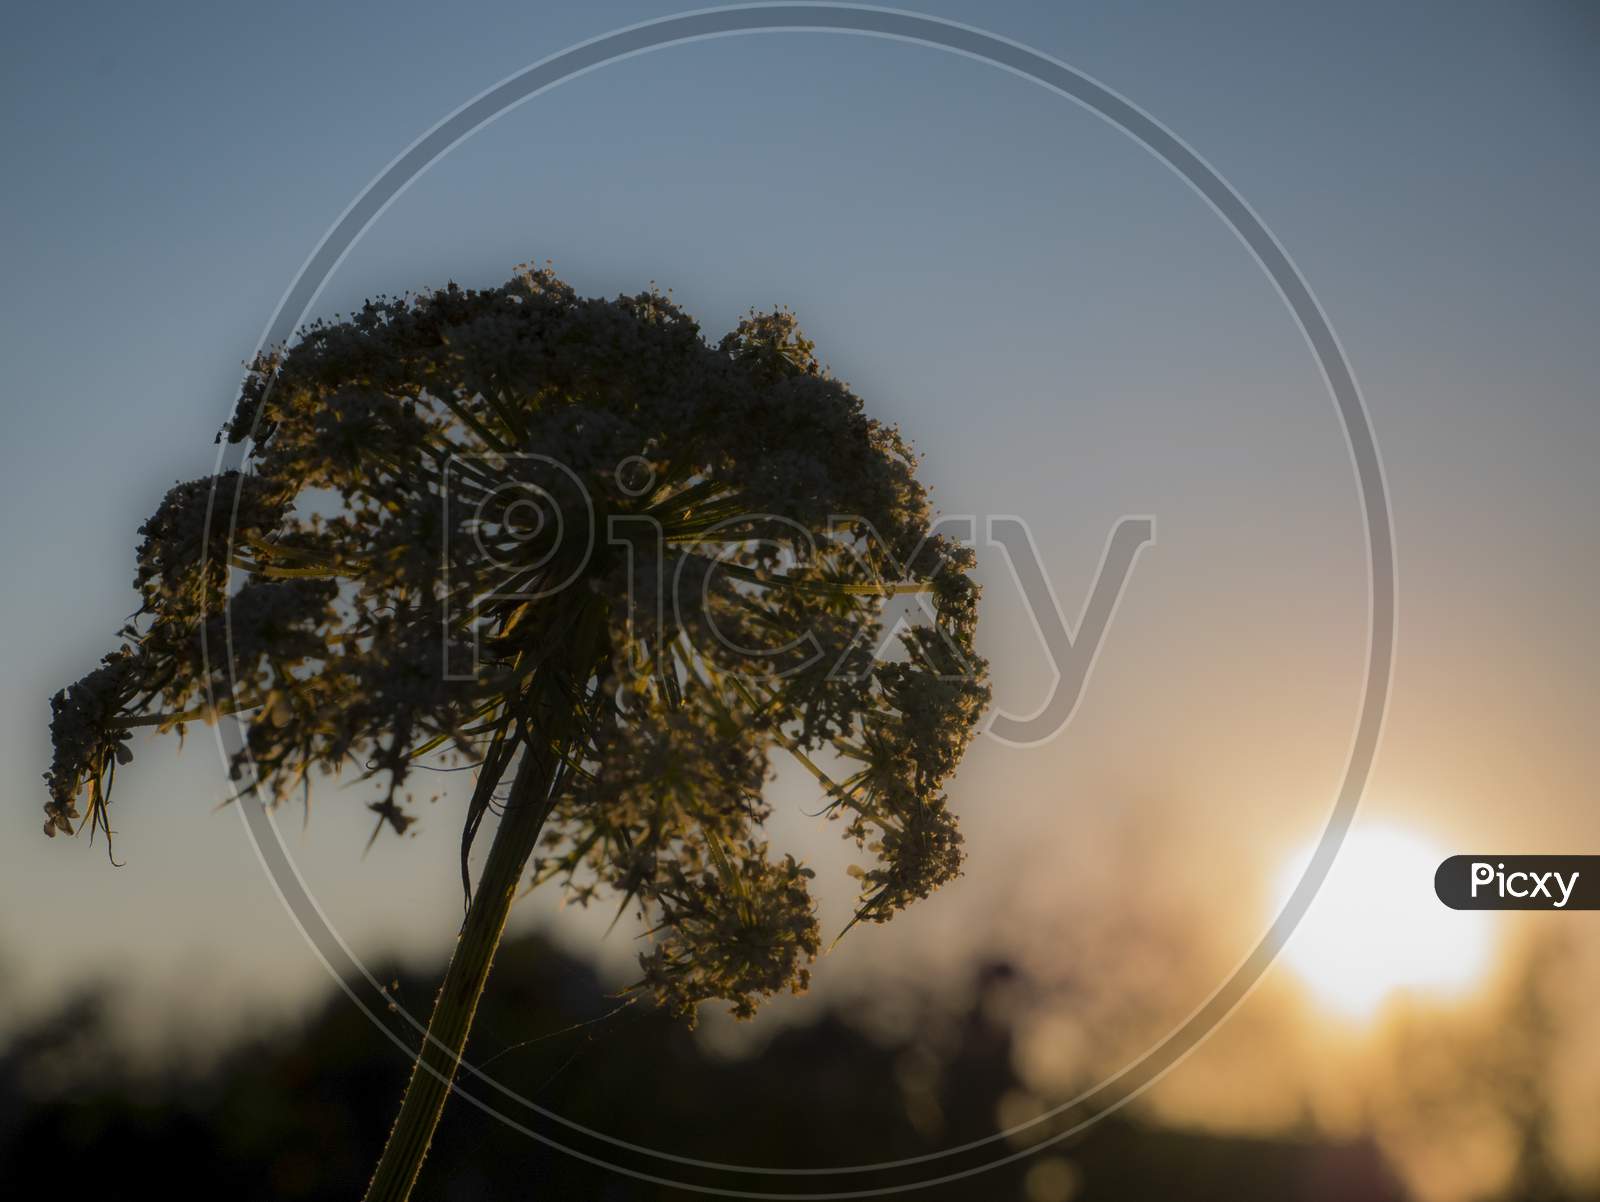 Shadow Of Onion Flower At Sunset